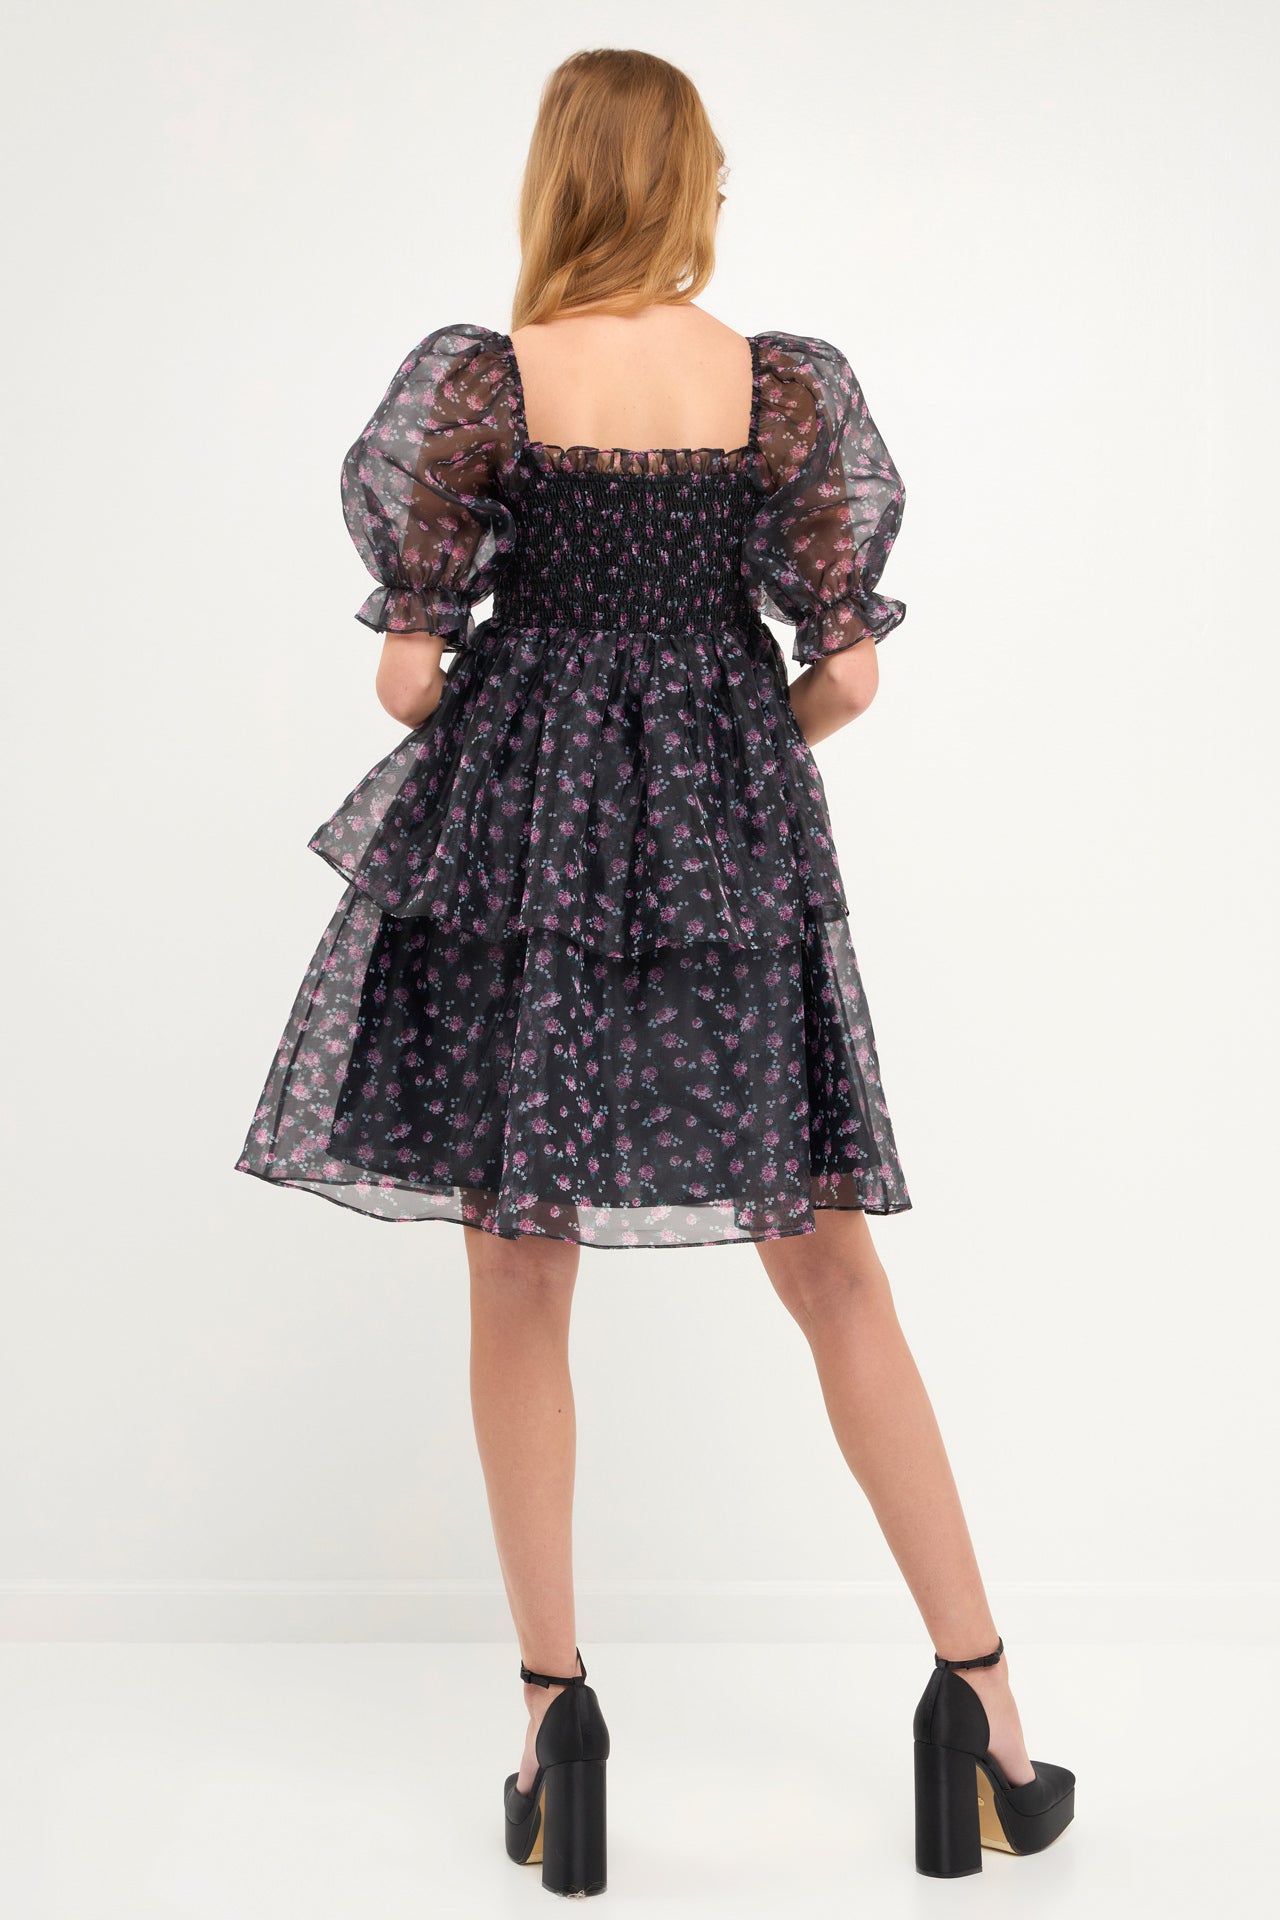 ENDLESS ROSE - Floral Organza Double Ruffled Baby Doll - DRESSES available at Objectrare